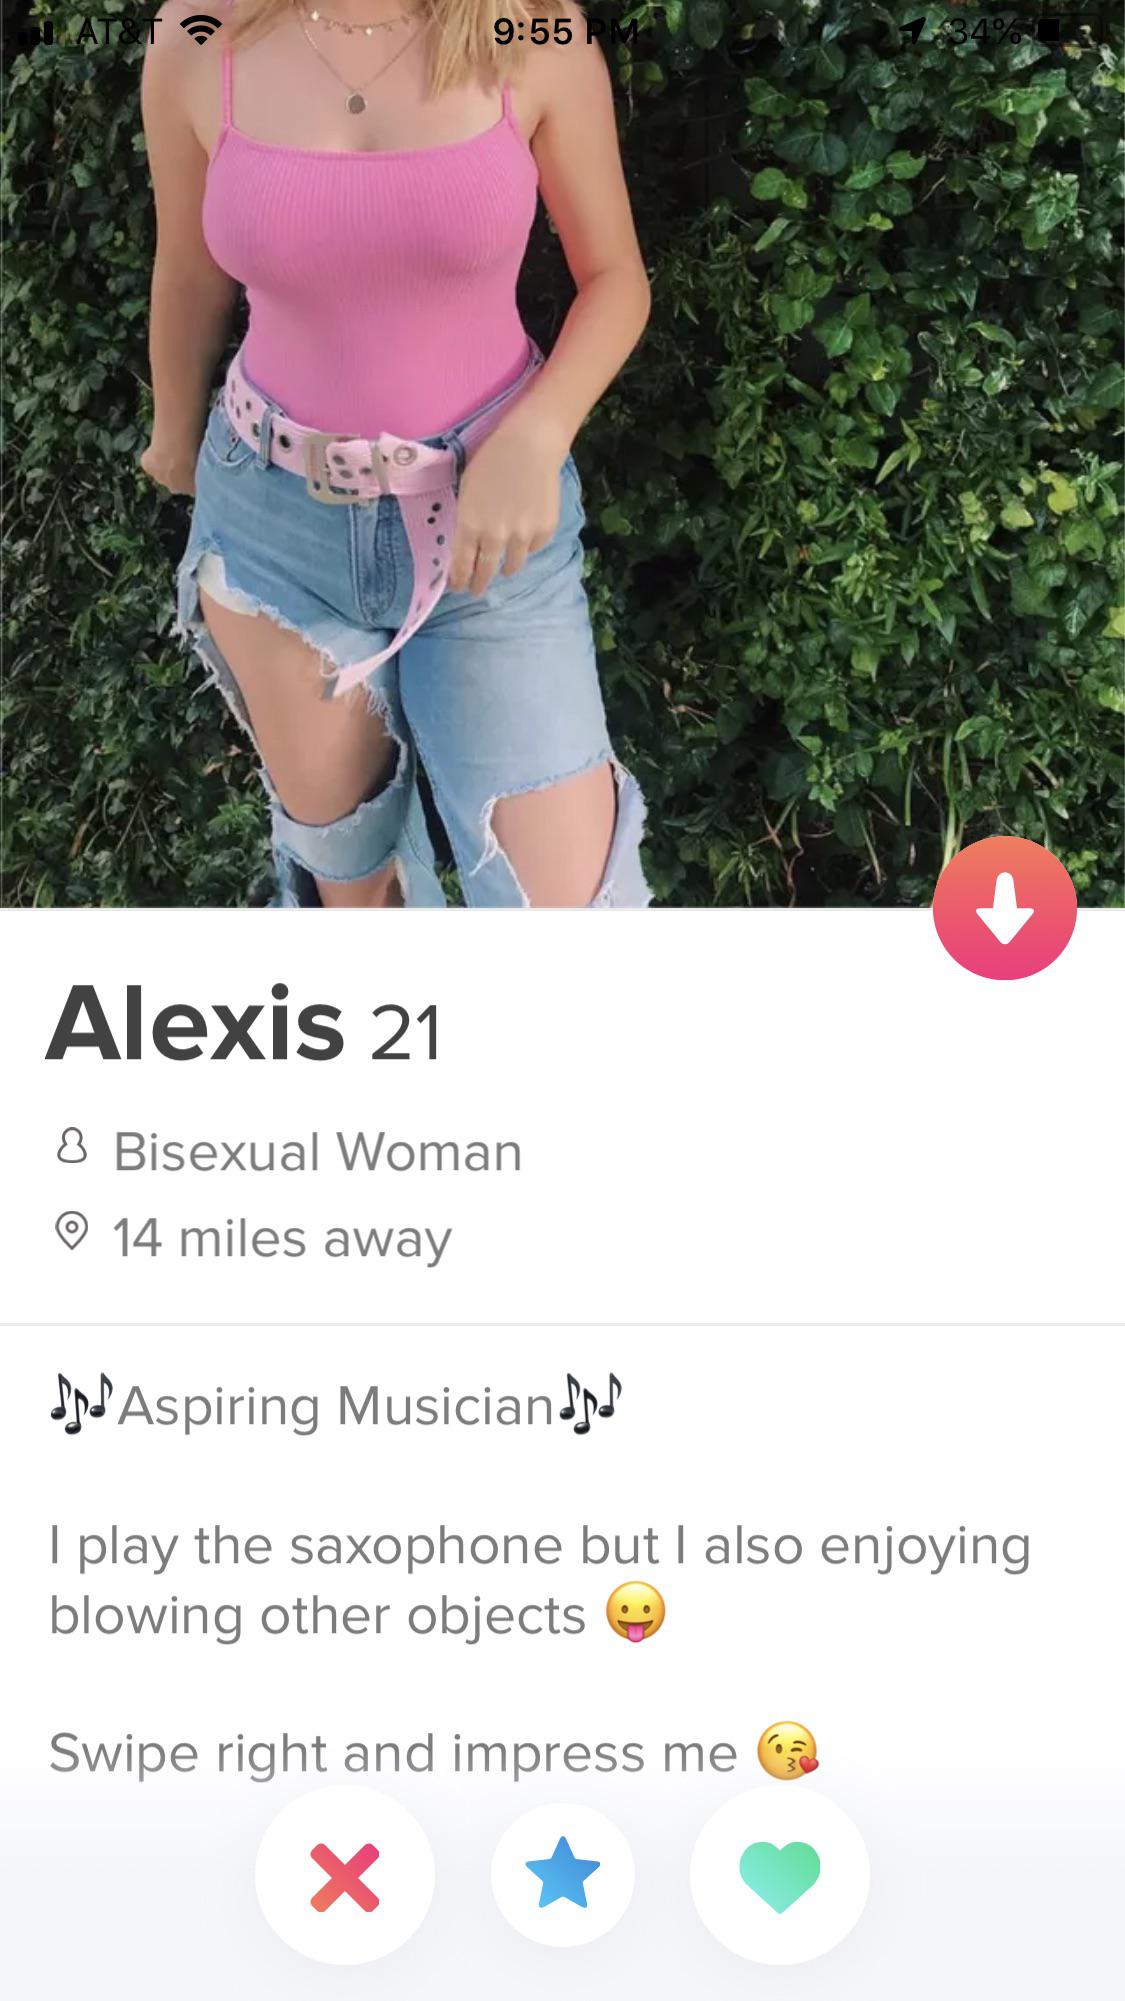 tinder wins and fails -Alexis 21 8 Bisexual Woman 14 miles away Is Aspiring Musiciando I play the saxophone but I also enjoying blowing other objects Swipe right and impress me